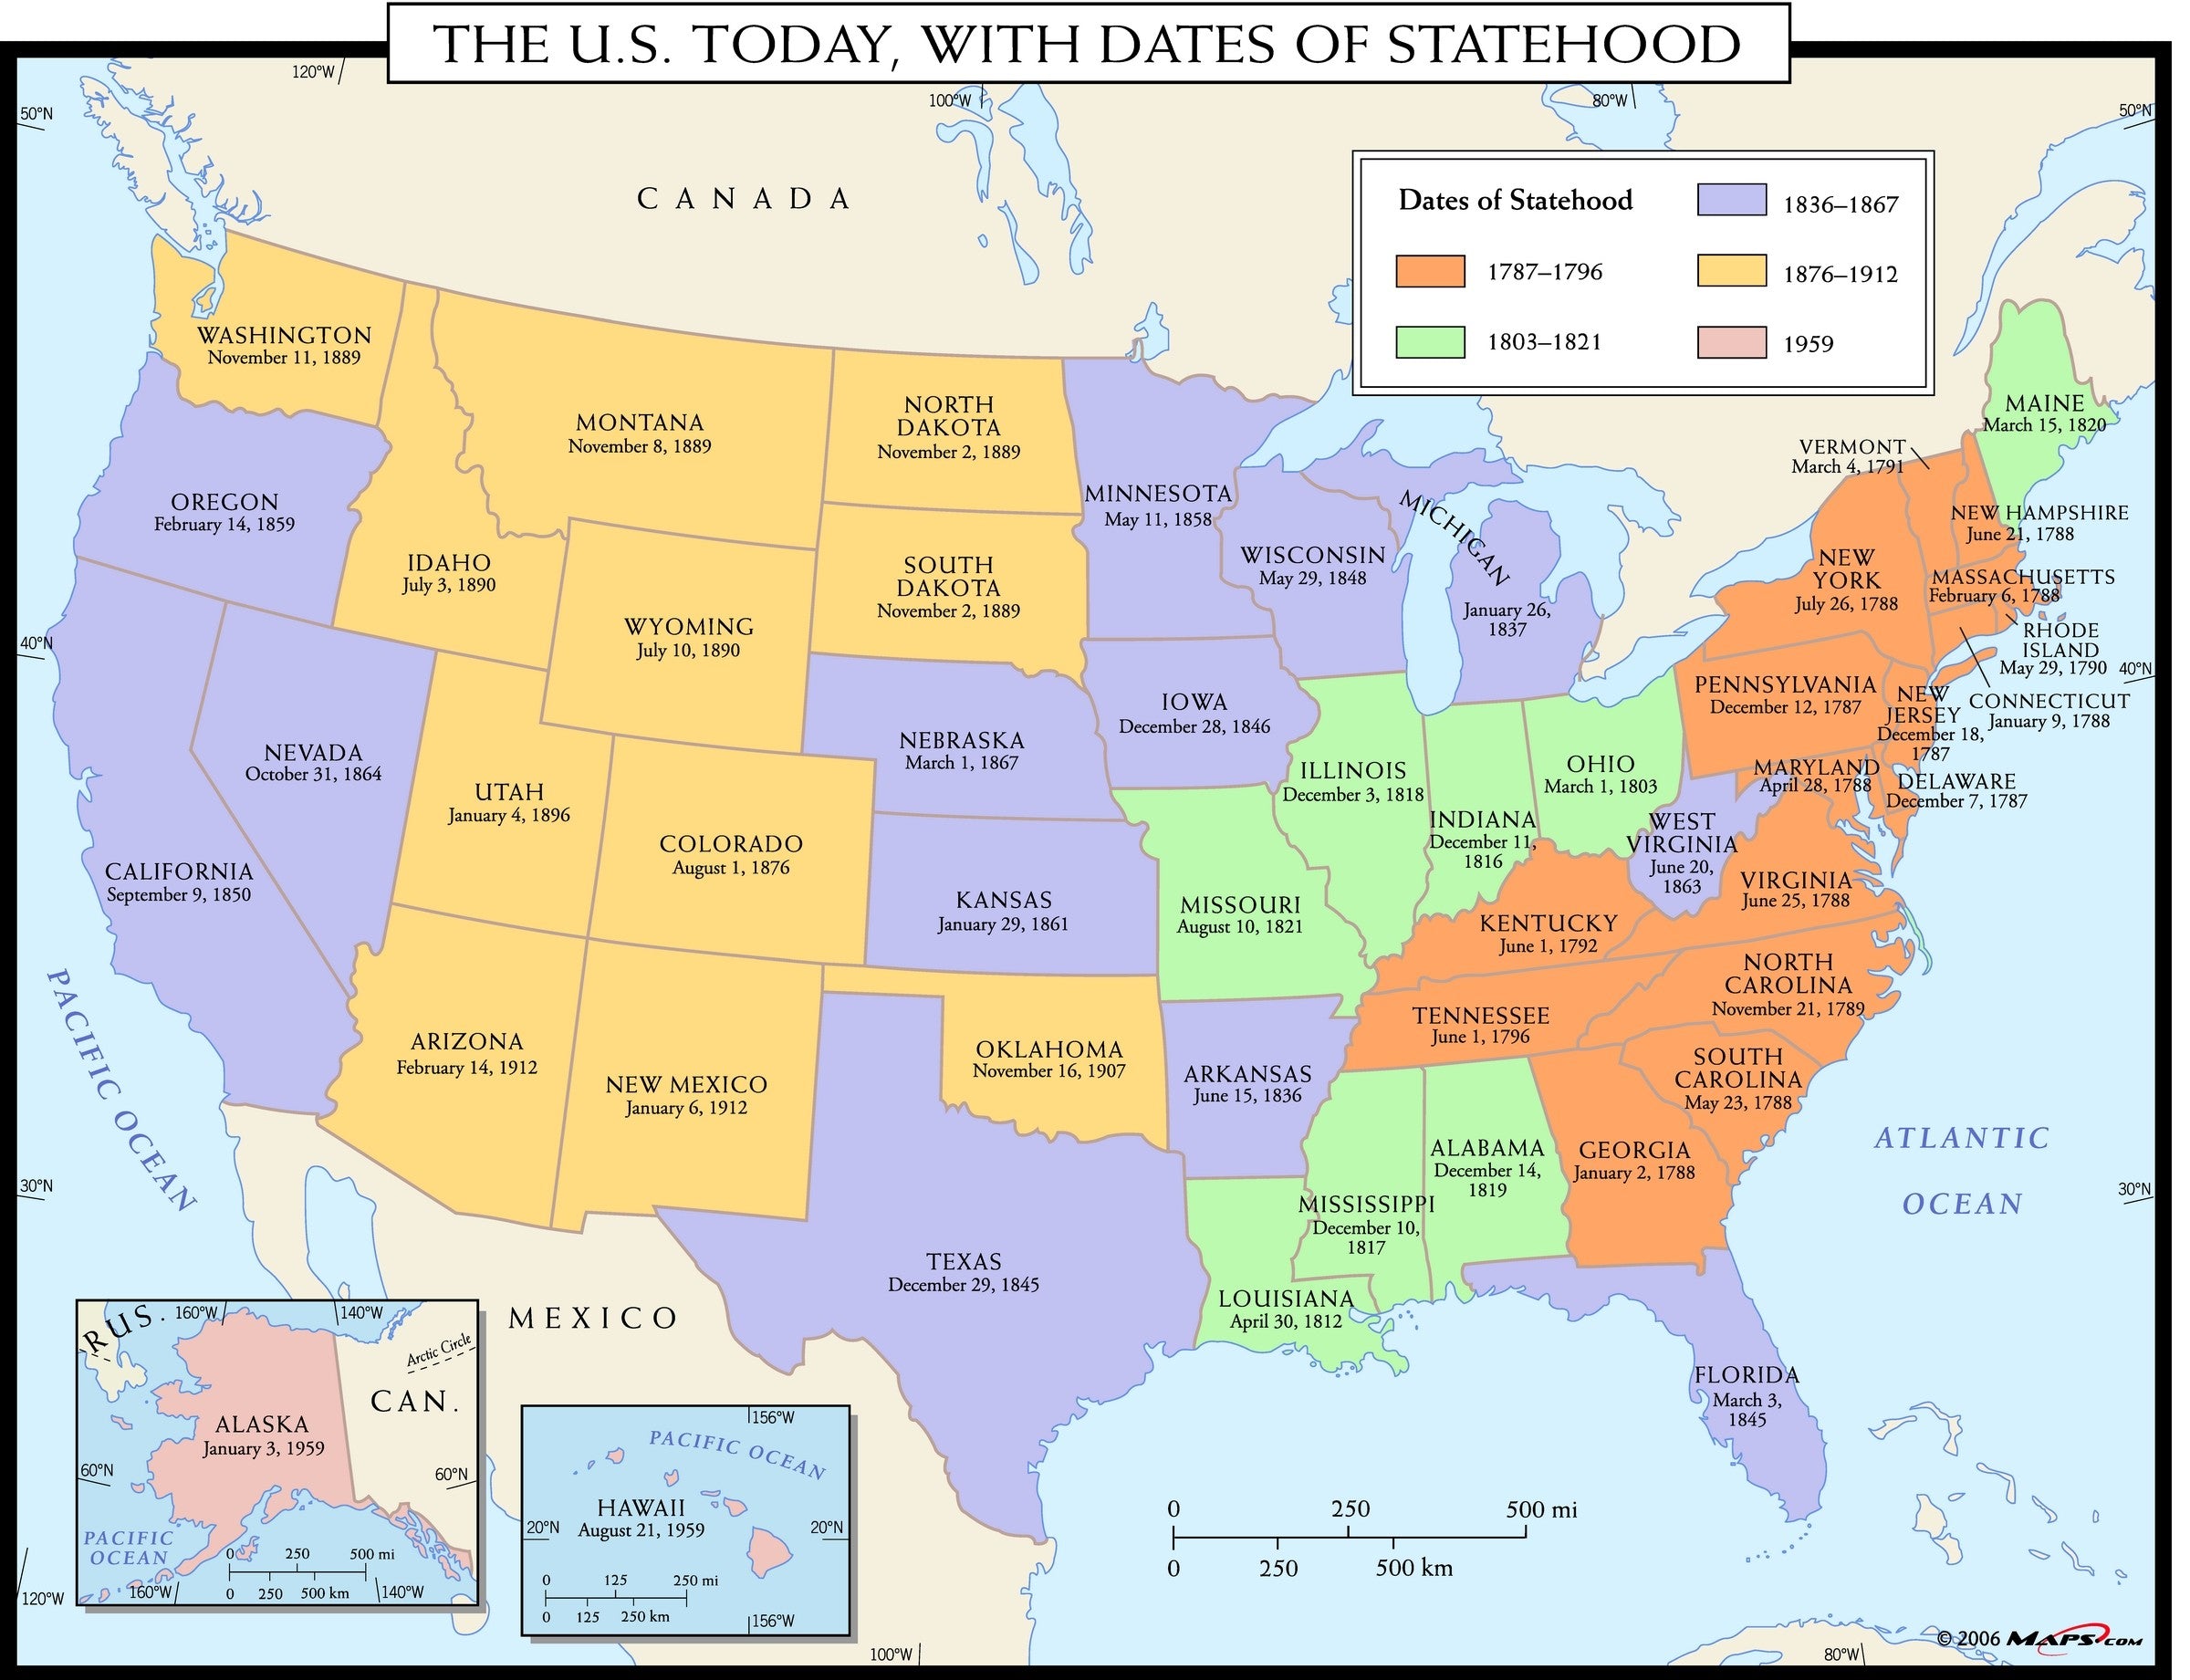 USA Today Map, with Dates of Statehood